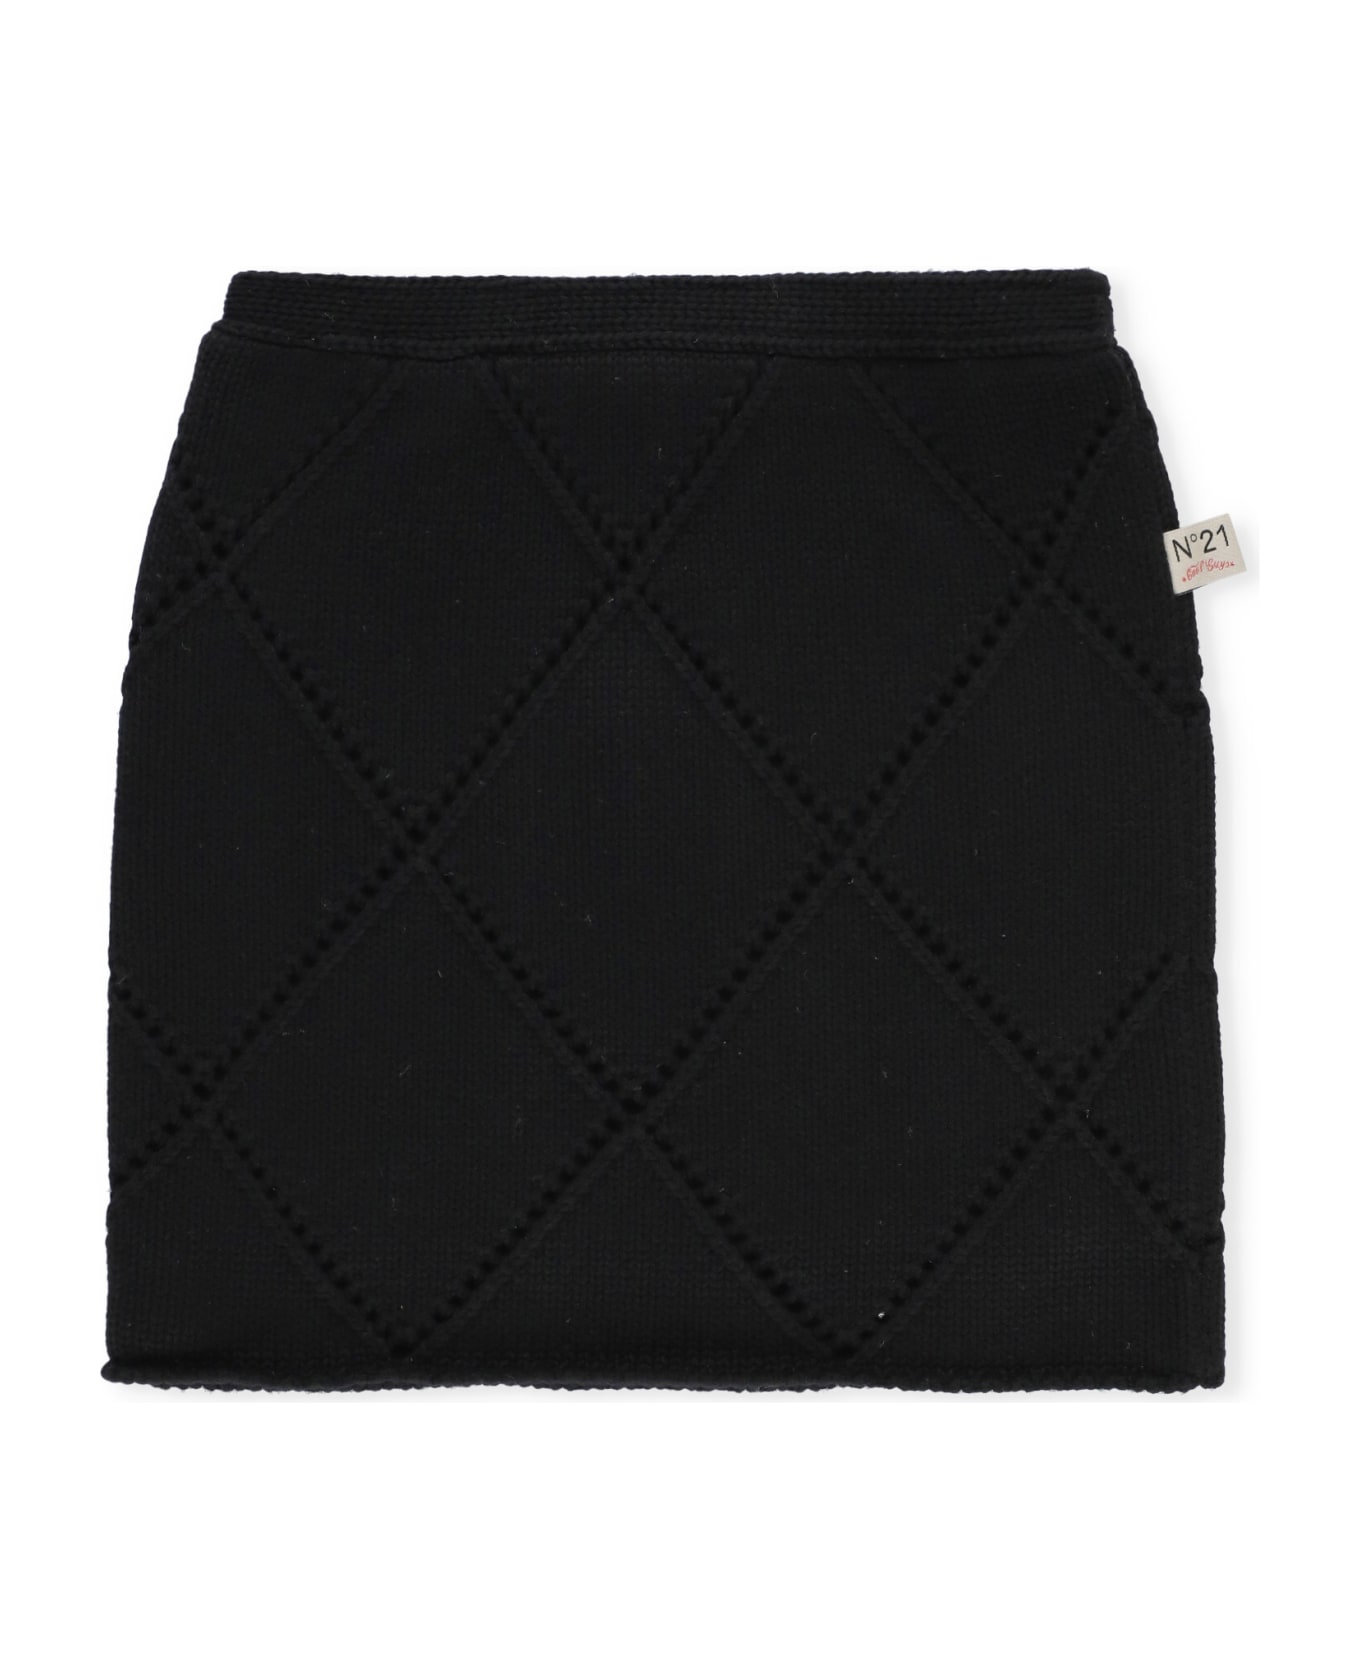 N.21 Wool And Cotton Skirt - Black ボトムス